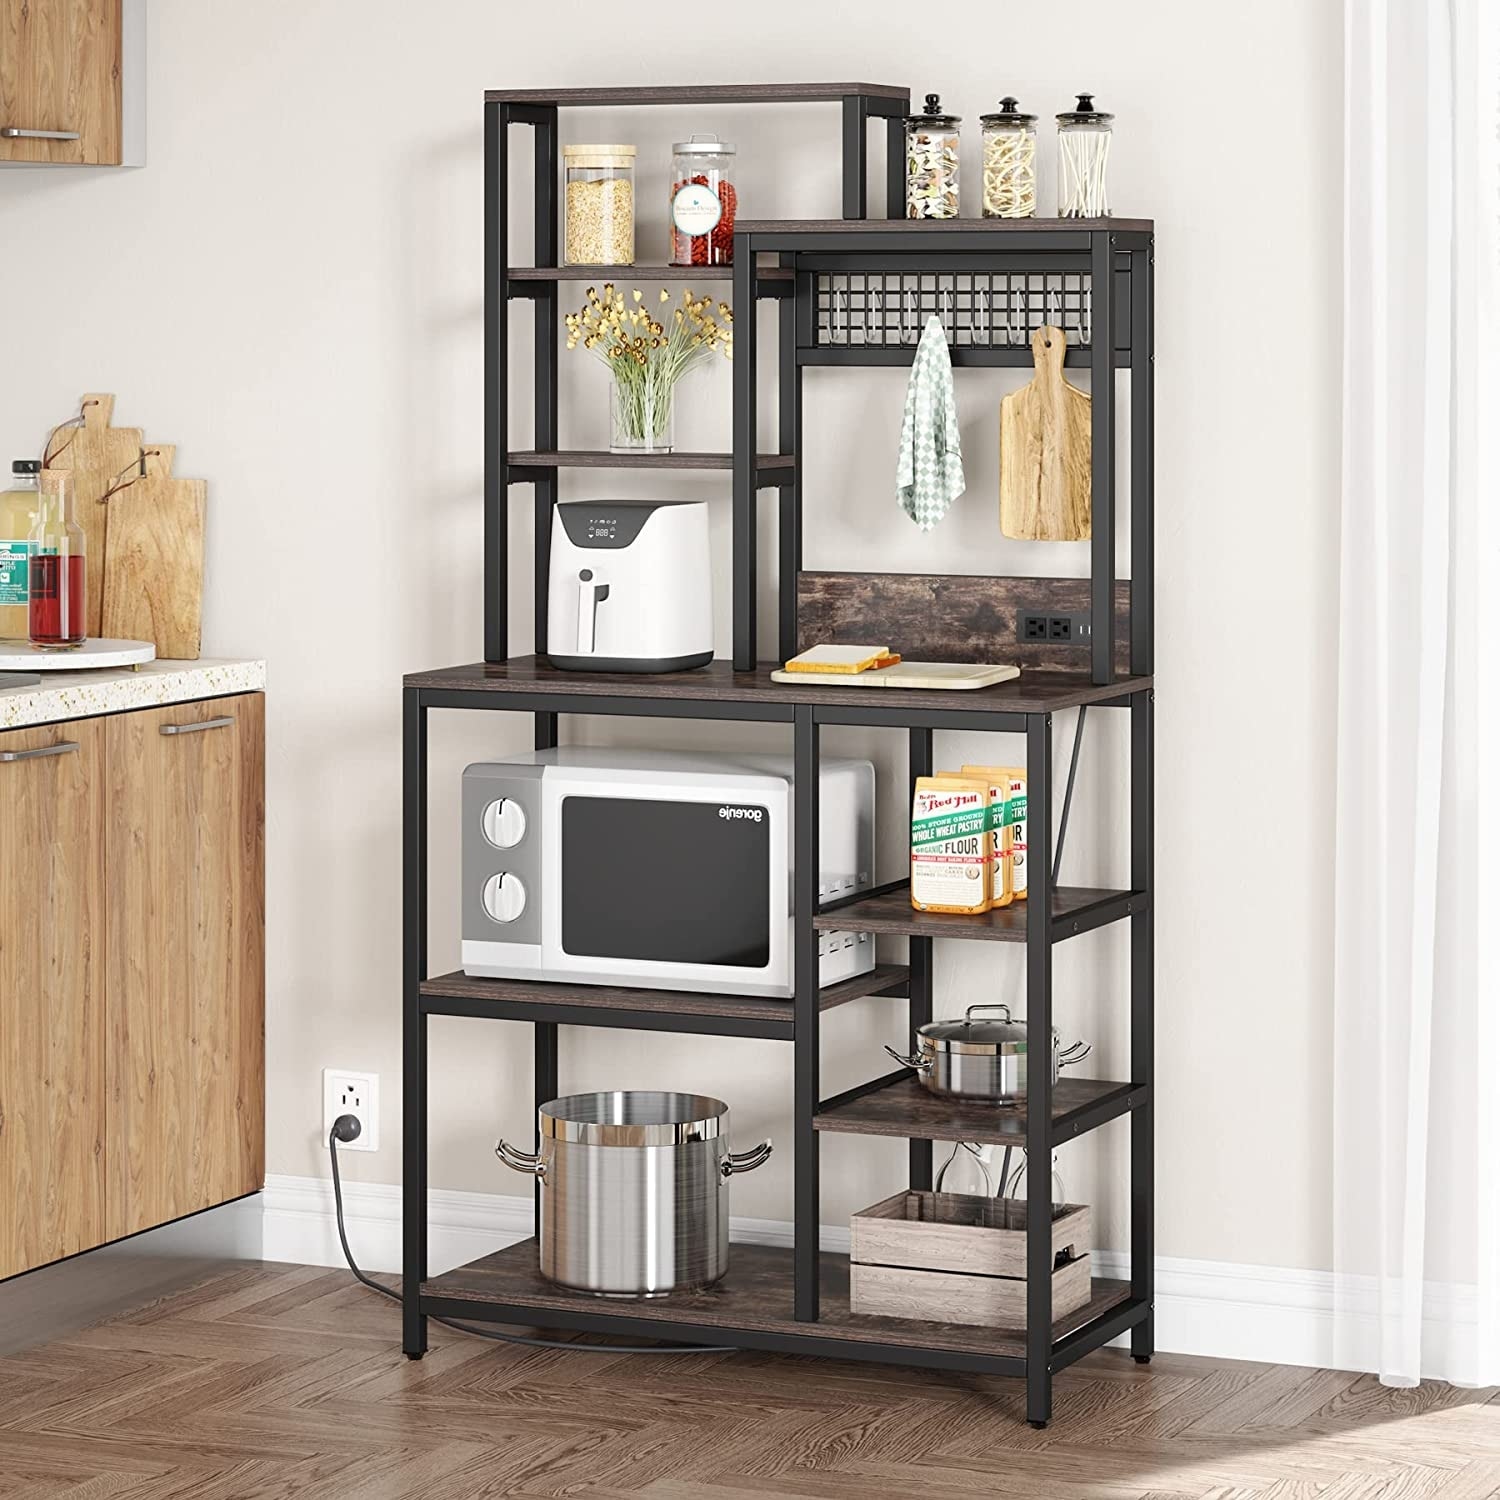 https://ak1.ostkcdn.com/images/products/is/images/direct/3eea7e7262f962023f865688b8af068bbb6fa988/Bakers-Rack-with-Power-Outlet%2C-9-Tier-Kitchen-Utility-Storage-Shelf-with-8-S-Hooks%2C-Rustic-Brown.jpg